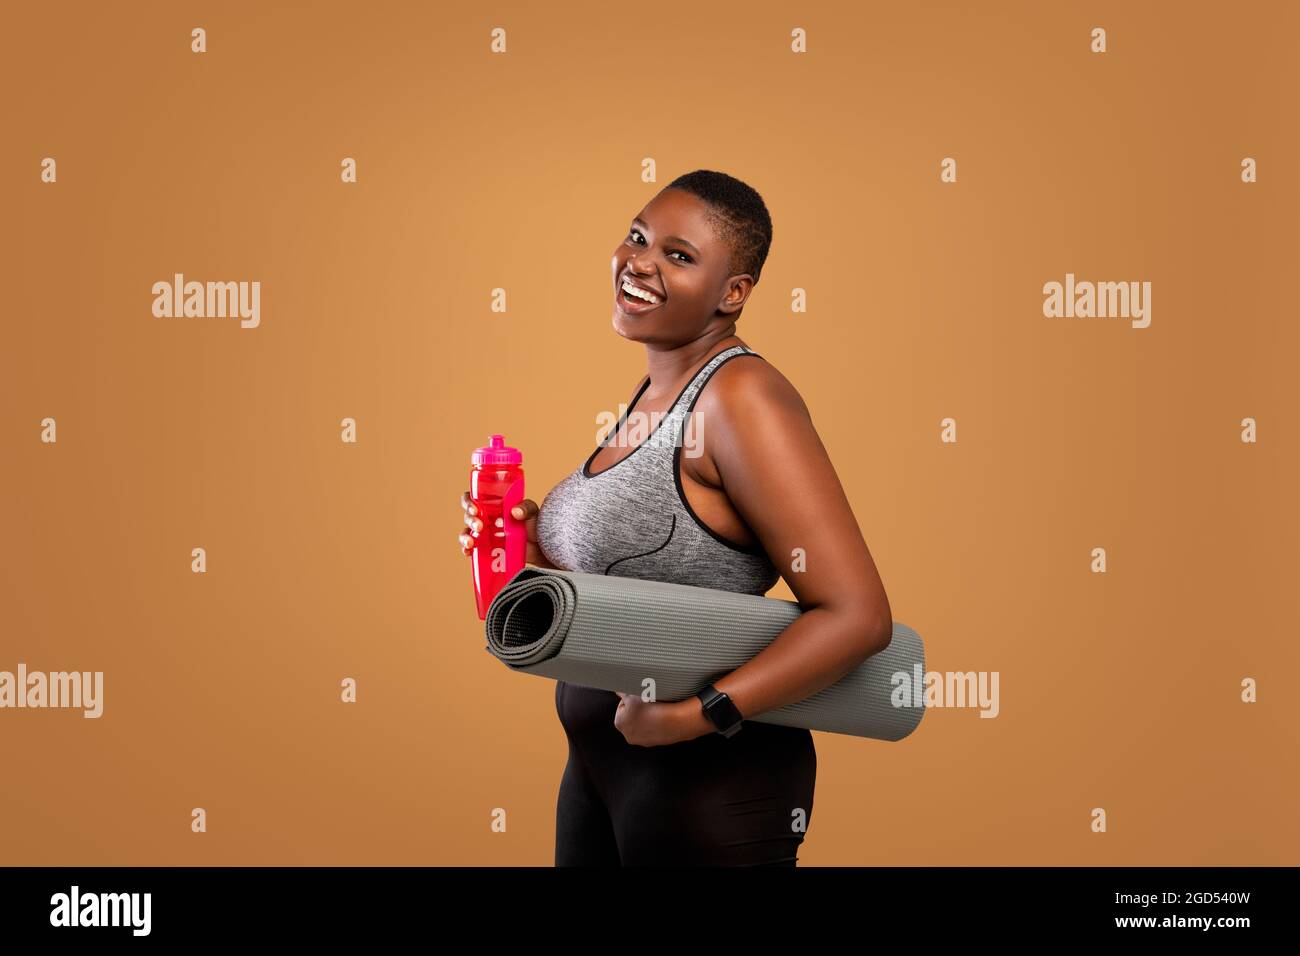 https://c8.alamy.com/comp/2GD540W/fitness-concept-portrait-of-happy-black-plus-size-woman-holding-water-bottle-and-yoga-mat-body-positive-female-smiling-and-looking-at-camera-standin-2GD540W.jpg